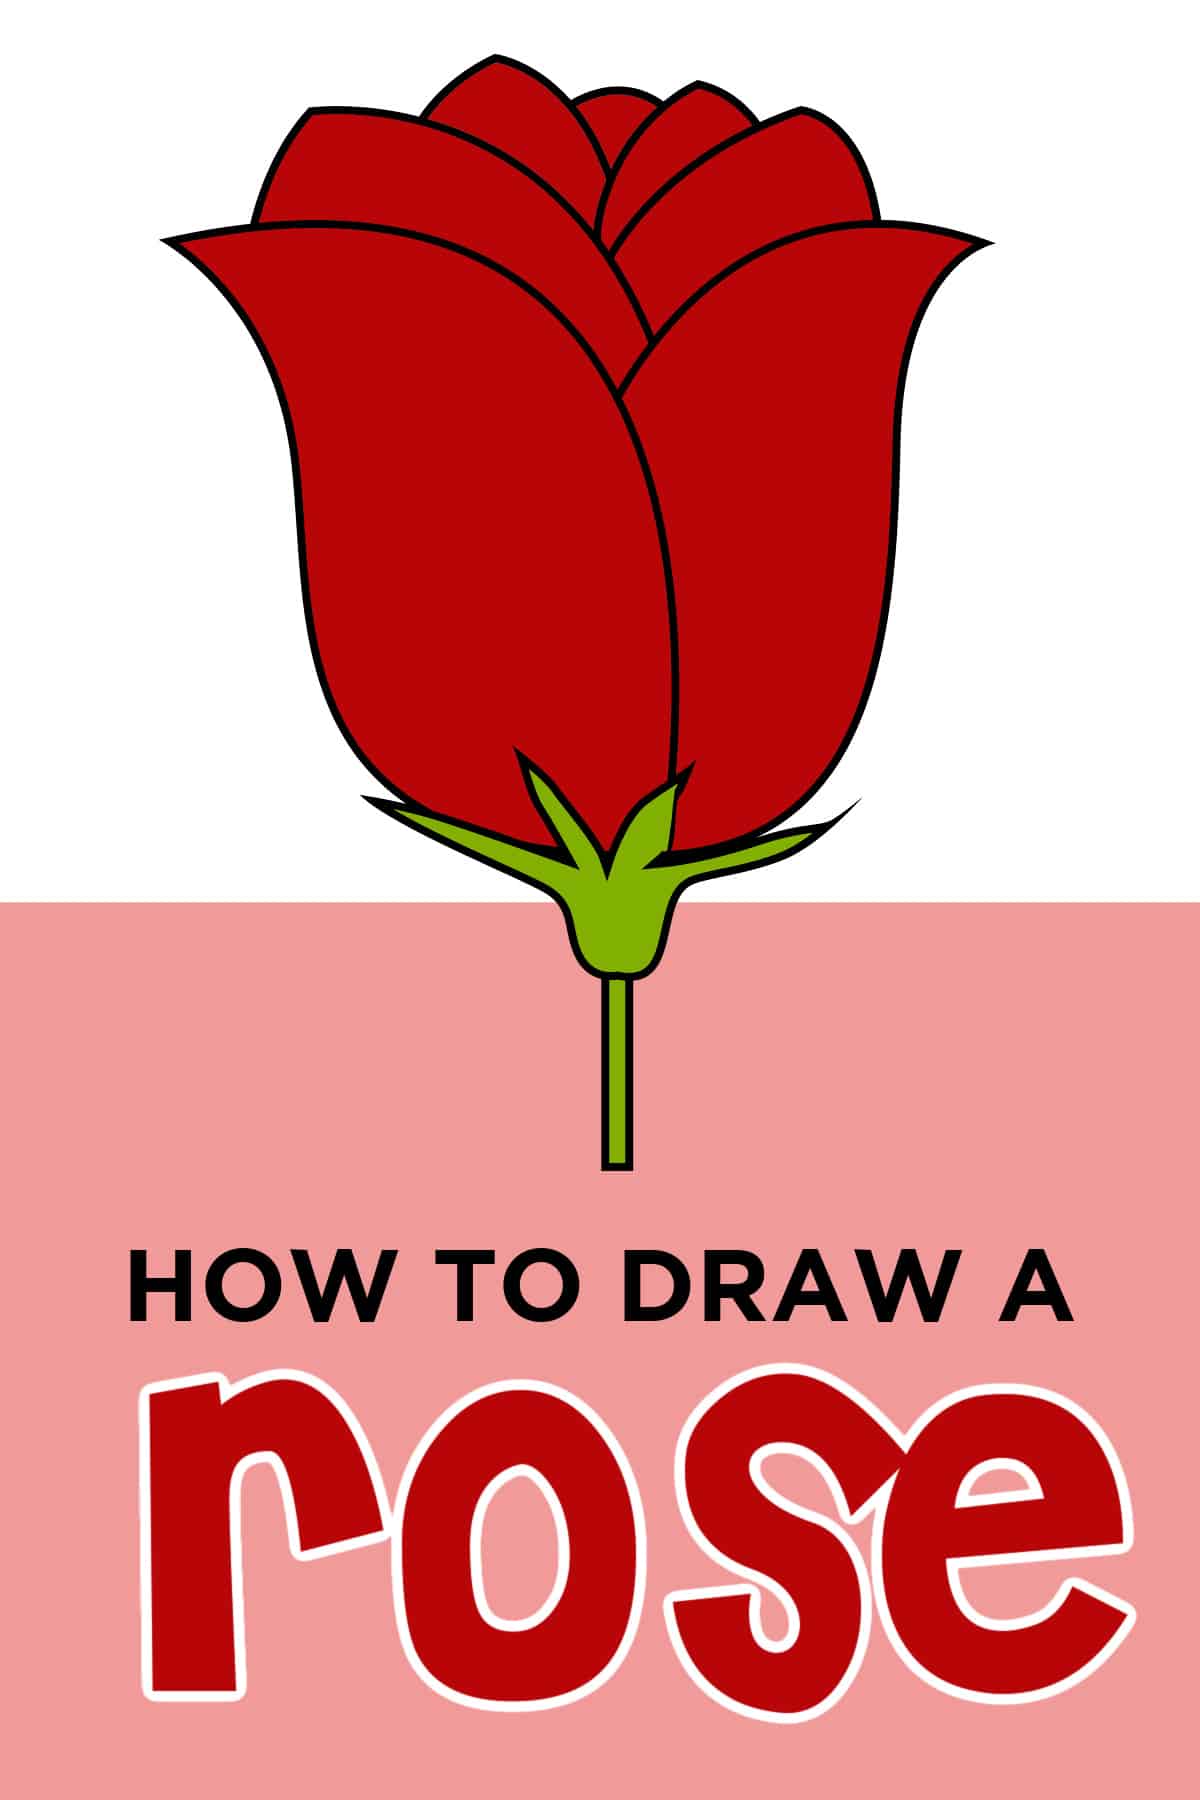 20 How to draw trees instructions for kids - Step by step - HubPages